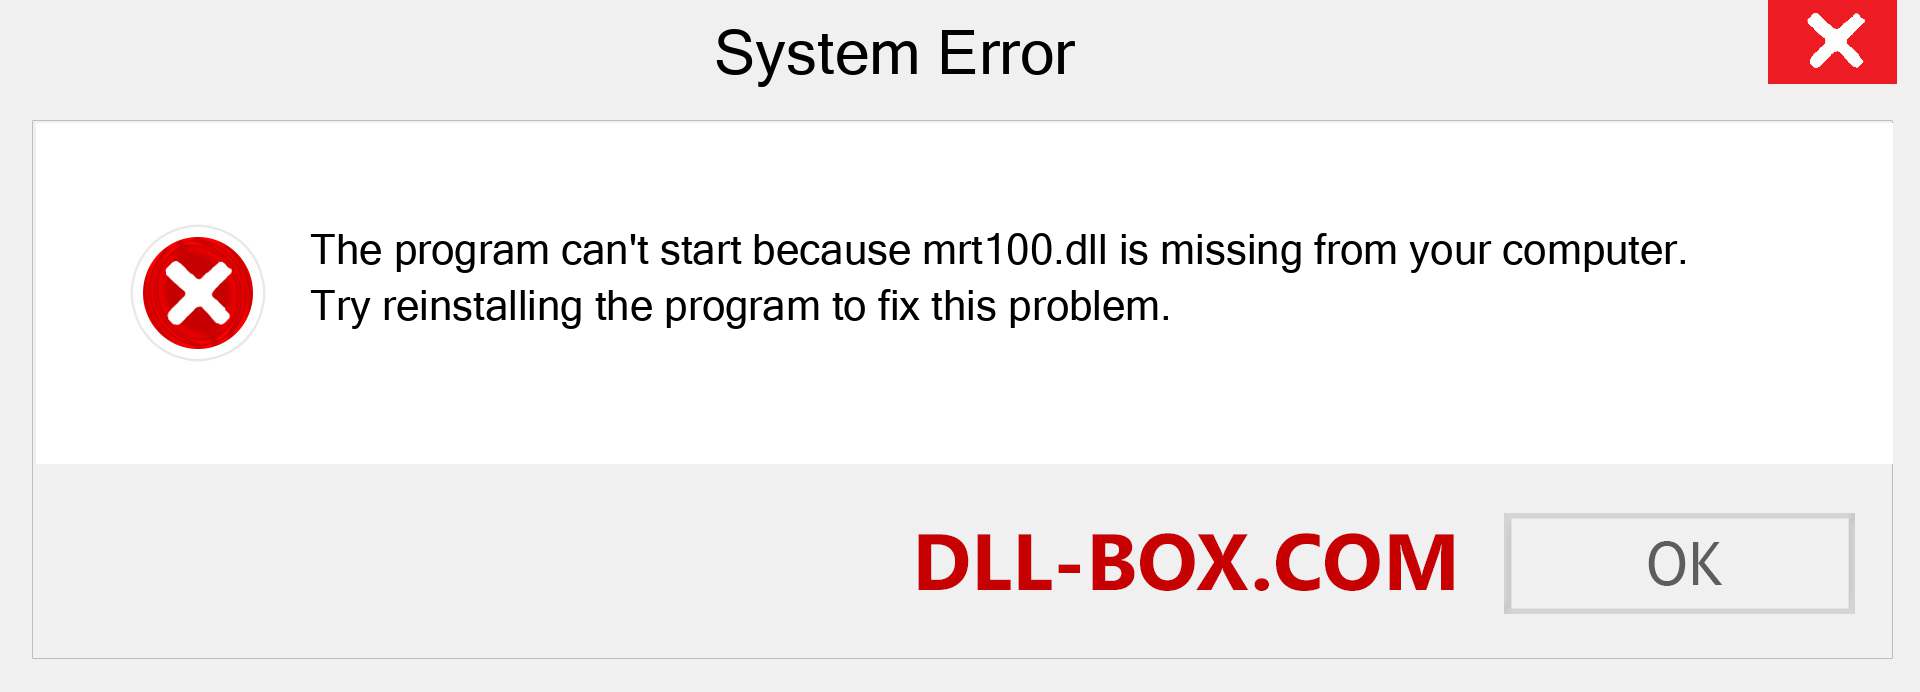  mrt100.dll file is missing?. Download for Windows 7, 8, 10 - Fix  mrt100 dll Missing Error on Windows, photos, images